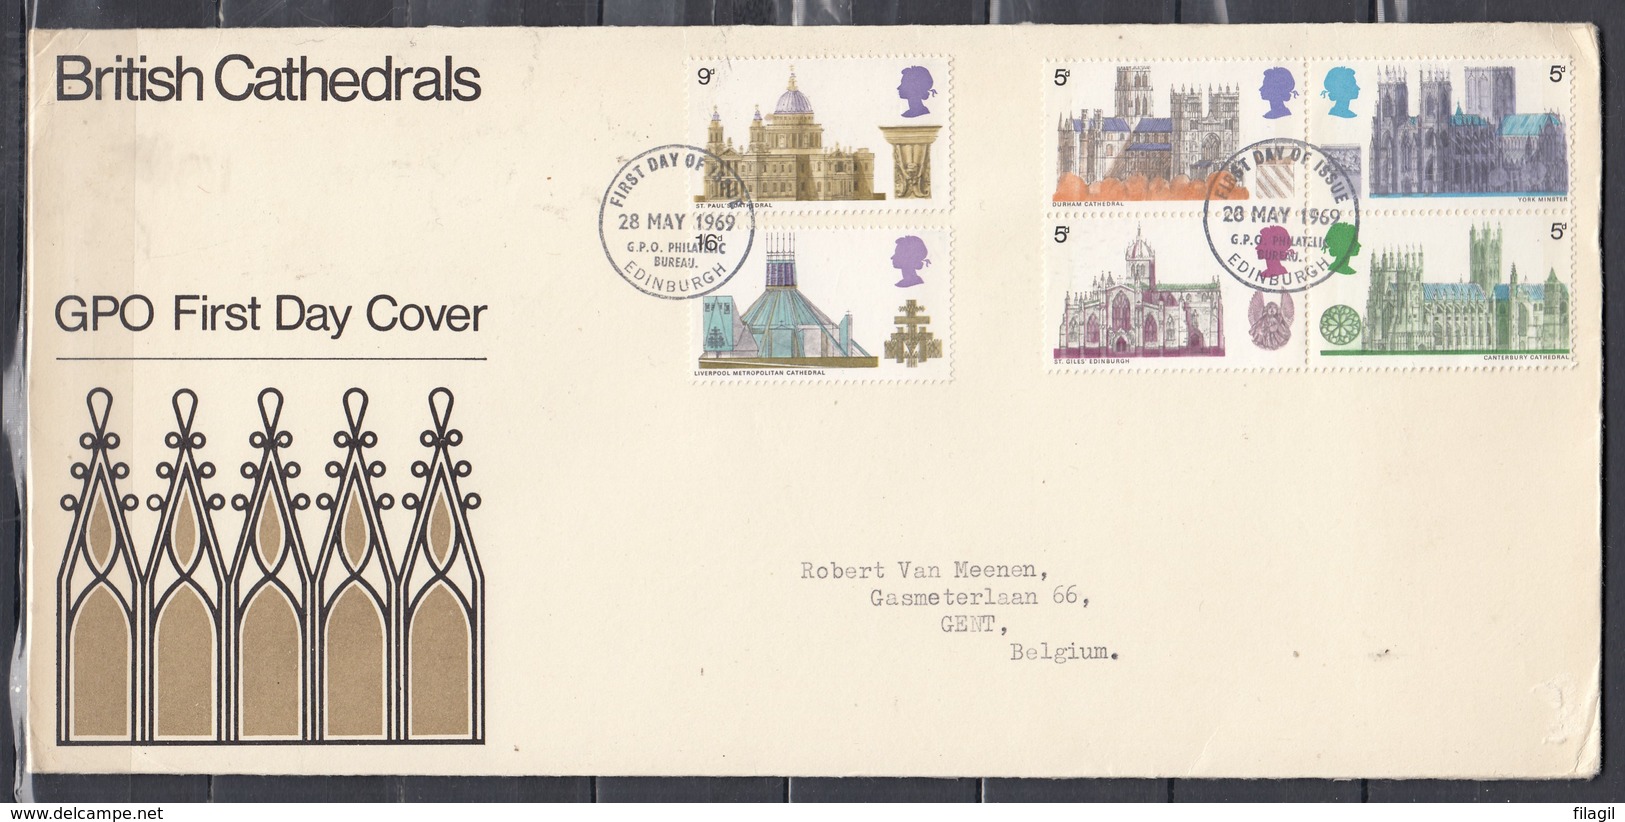 First Day Cover British Cathedrals Edingburgh 28 MAY 1969 - Briefe U. Dokumente